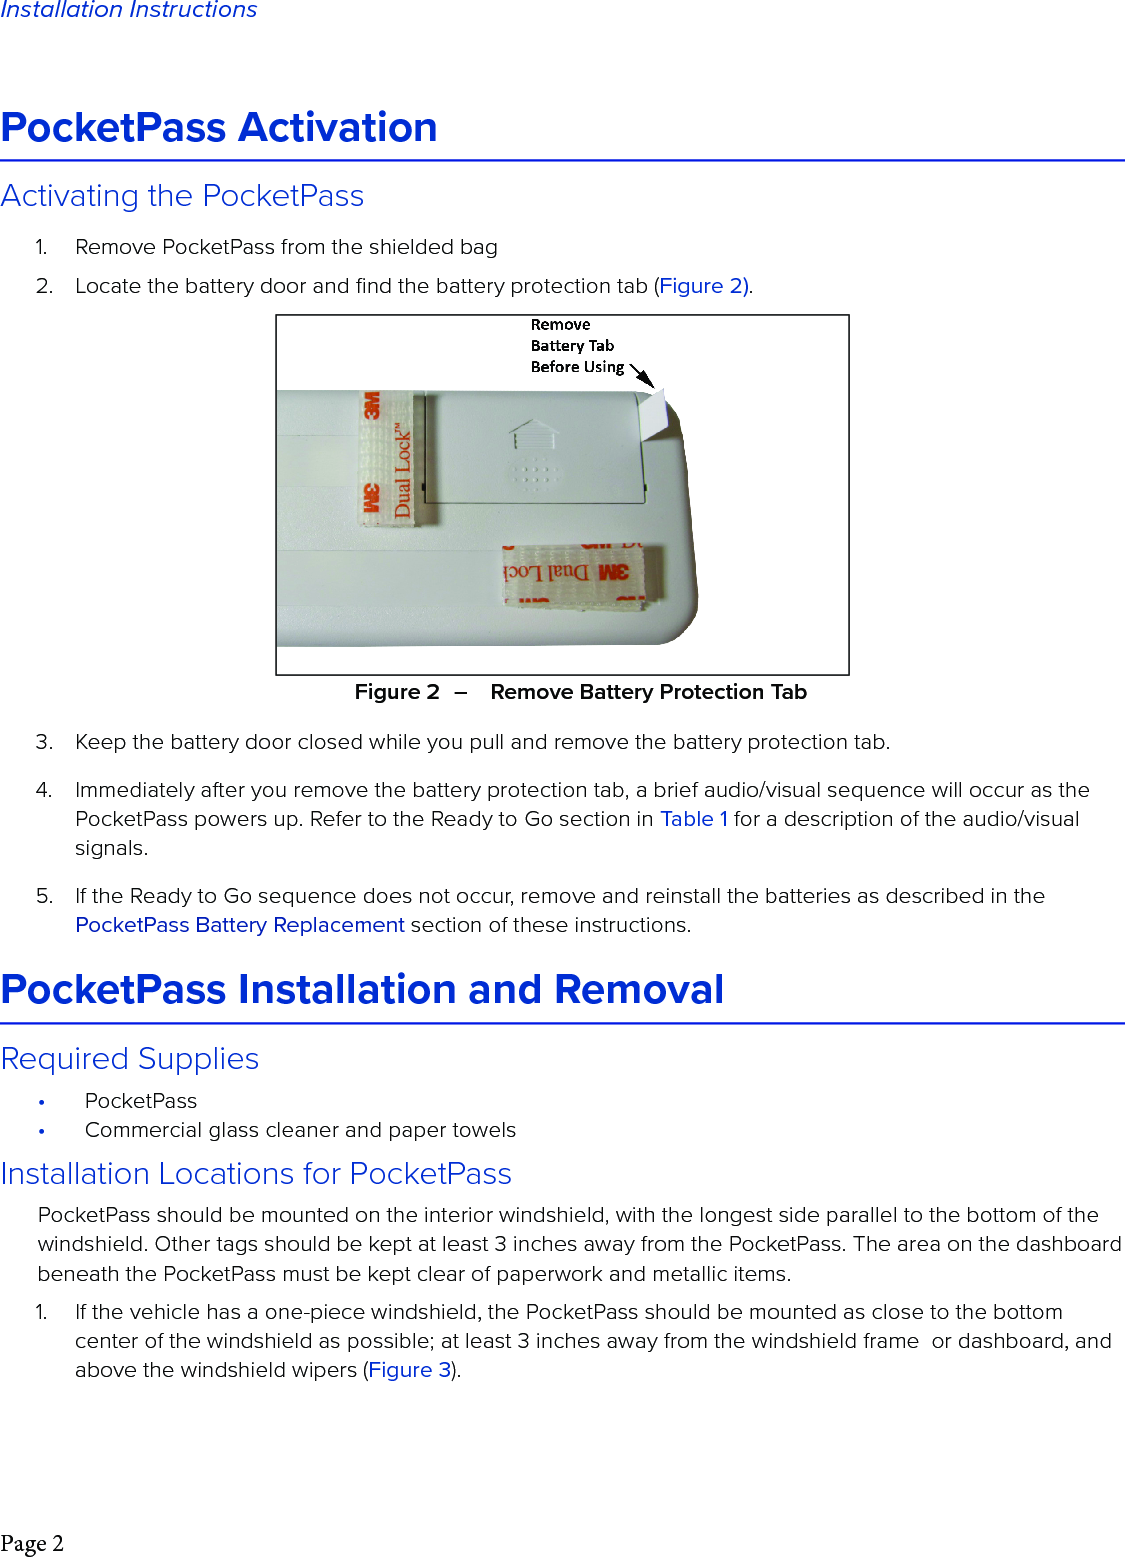 Page 2Installation InstructionsPocketPass ActivationActivating the PocketPass1.  Remove PocketPass from the shielded bag2.  Locate the battery door and ﬁnd the battery protection tab (Figure 2).3.  Keep the battery door closed while you pull and remove the battery protection tab.4.  Immediately after you remove the battery protection tab, a brief audio/visual sequence will occur as the PocketPass powers up. Refer to the Ready to Go section in Table 1 for a description of the audio/visual signals. 5.  If the Ready to Go sequence does not occur, remove and reinstall the batteries as described in the PocketPass Battery Replacement section of these instructions. PocketPass Installation and Removal Required Supplies•  PocketPass•  Commercial glass cleaner and paper towelsInstallation Locations for PocketPassPocketPass should be mounted on the interior windshield, with the longest side parallel to the bottom of the windshield. Other tags should be kept at least 3 inches away from the PocketPass. The area on the dashboard beneath the PocketPass must be kept clear of paperwork and metallic items. 1.  If the vehicle has a one-piece windshield, the PocketPass should be mounted as close to the bottom center of the windshield as possible; at least 3 inches away from the windshield frame  or dashboard, and above the windshield wipers (Figure 3). Figure 2  –    Remove Battery Protection Tab